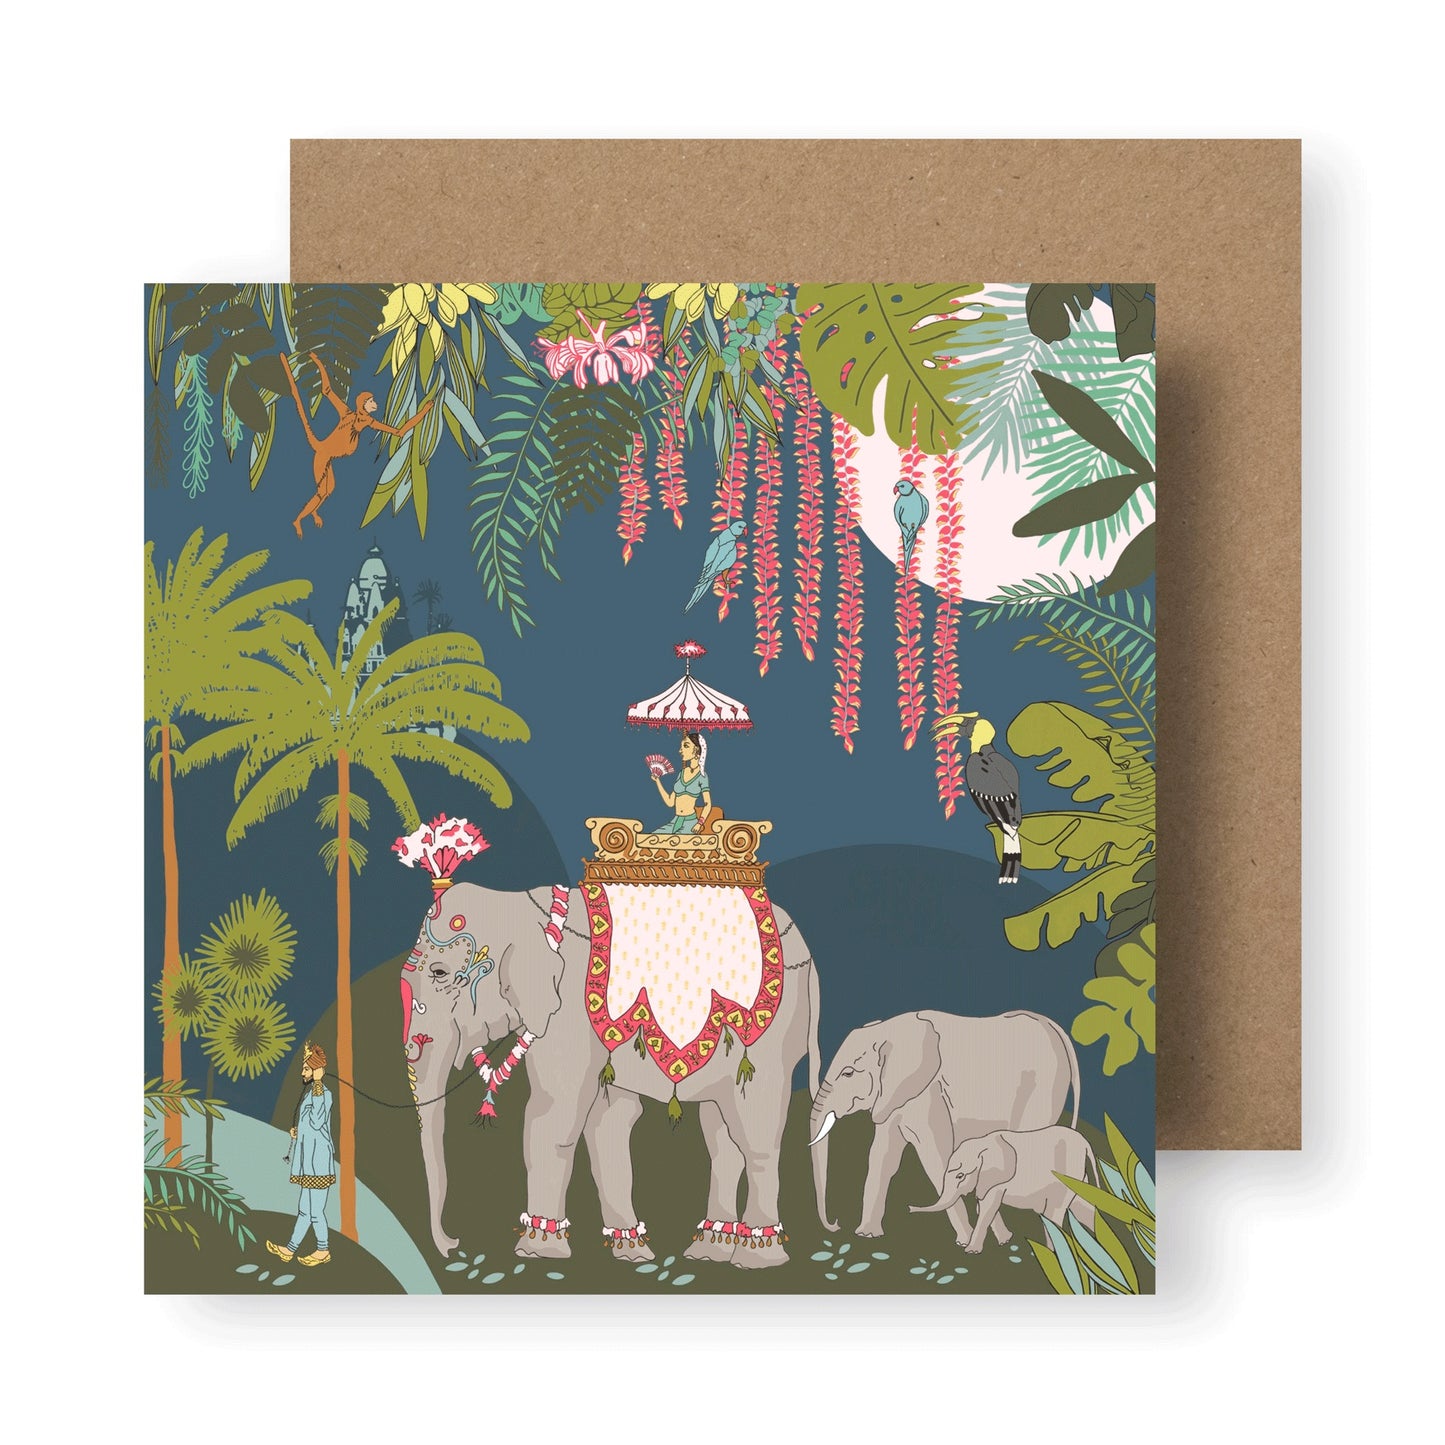 Indian style illustration with elephants and tropical vegetation